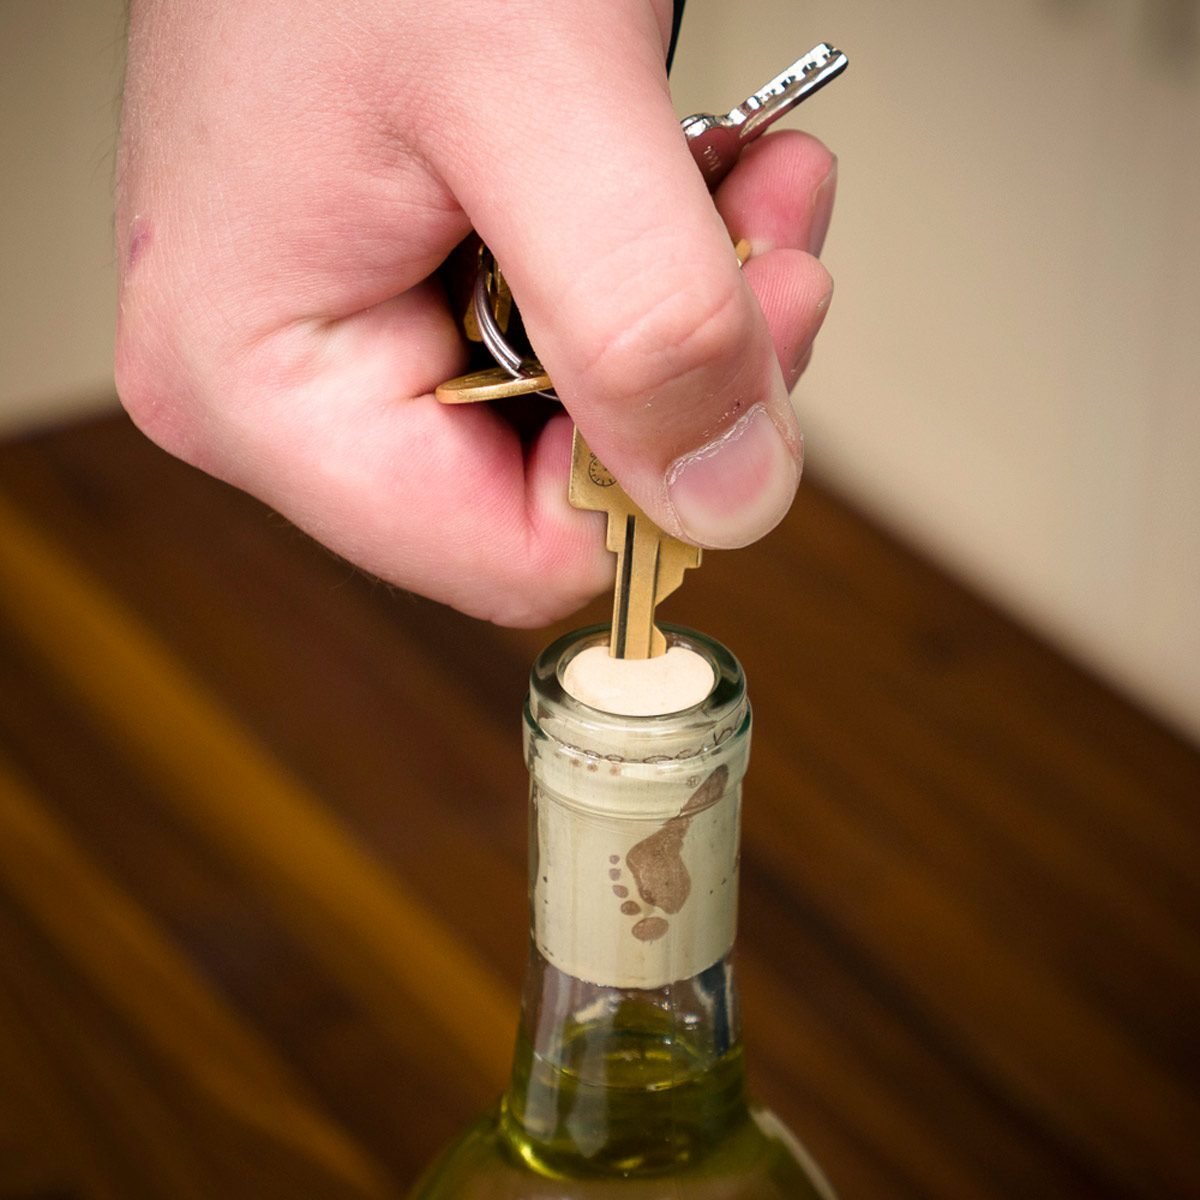 How To Open A Wine Bottle Without An Opener